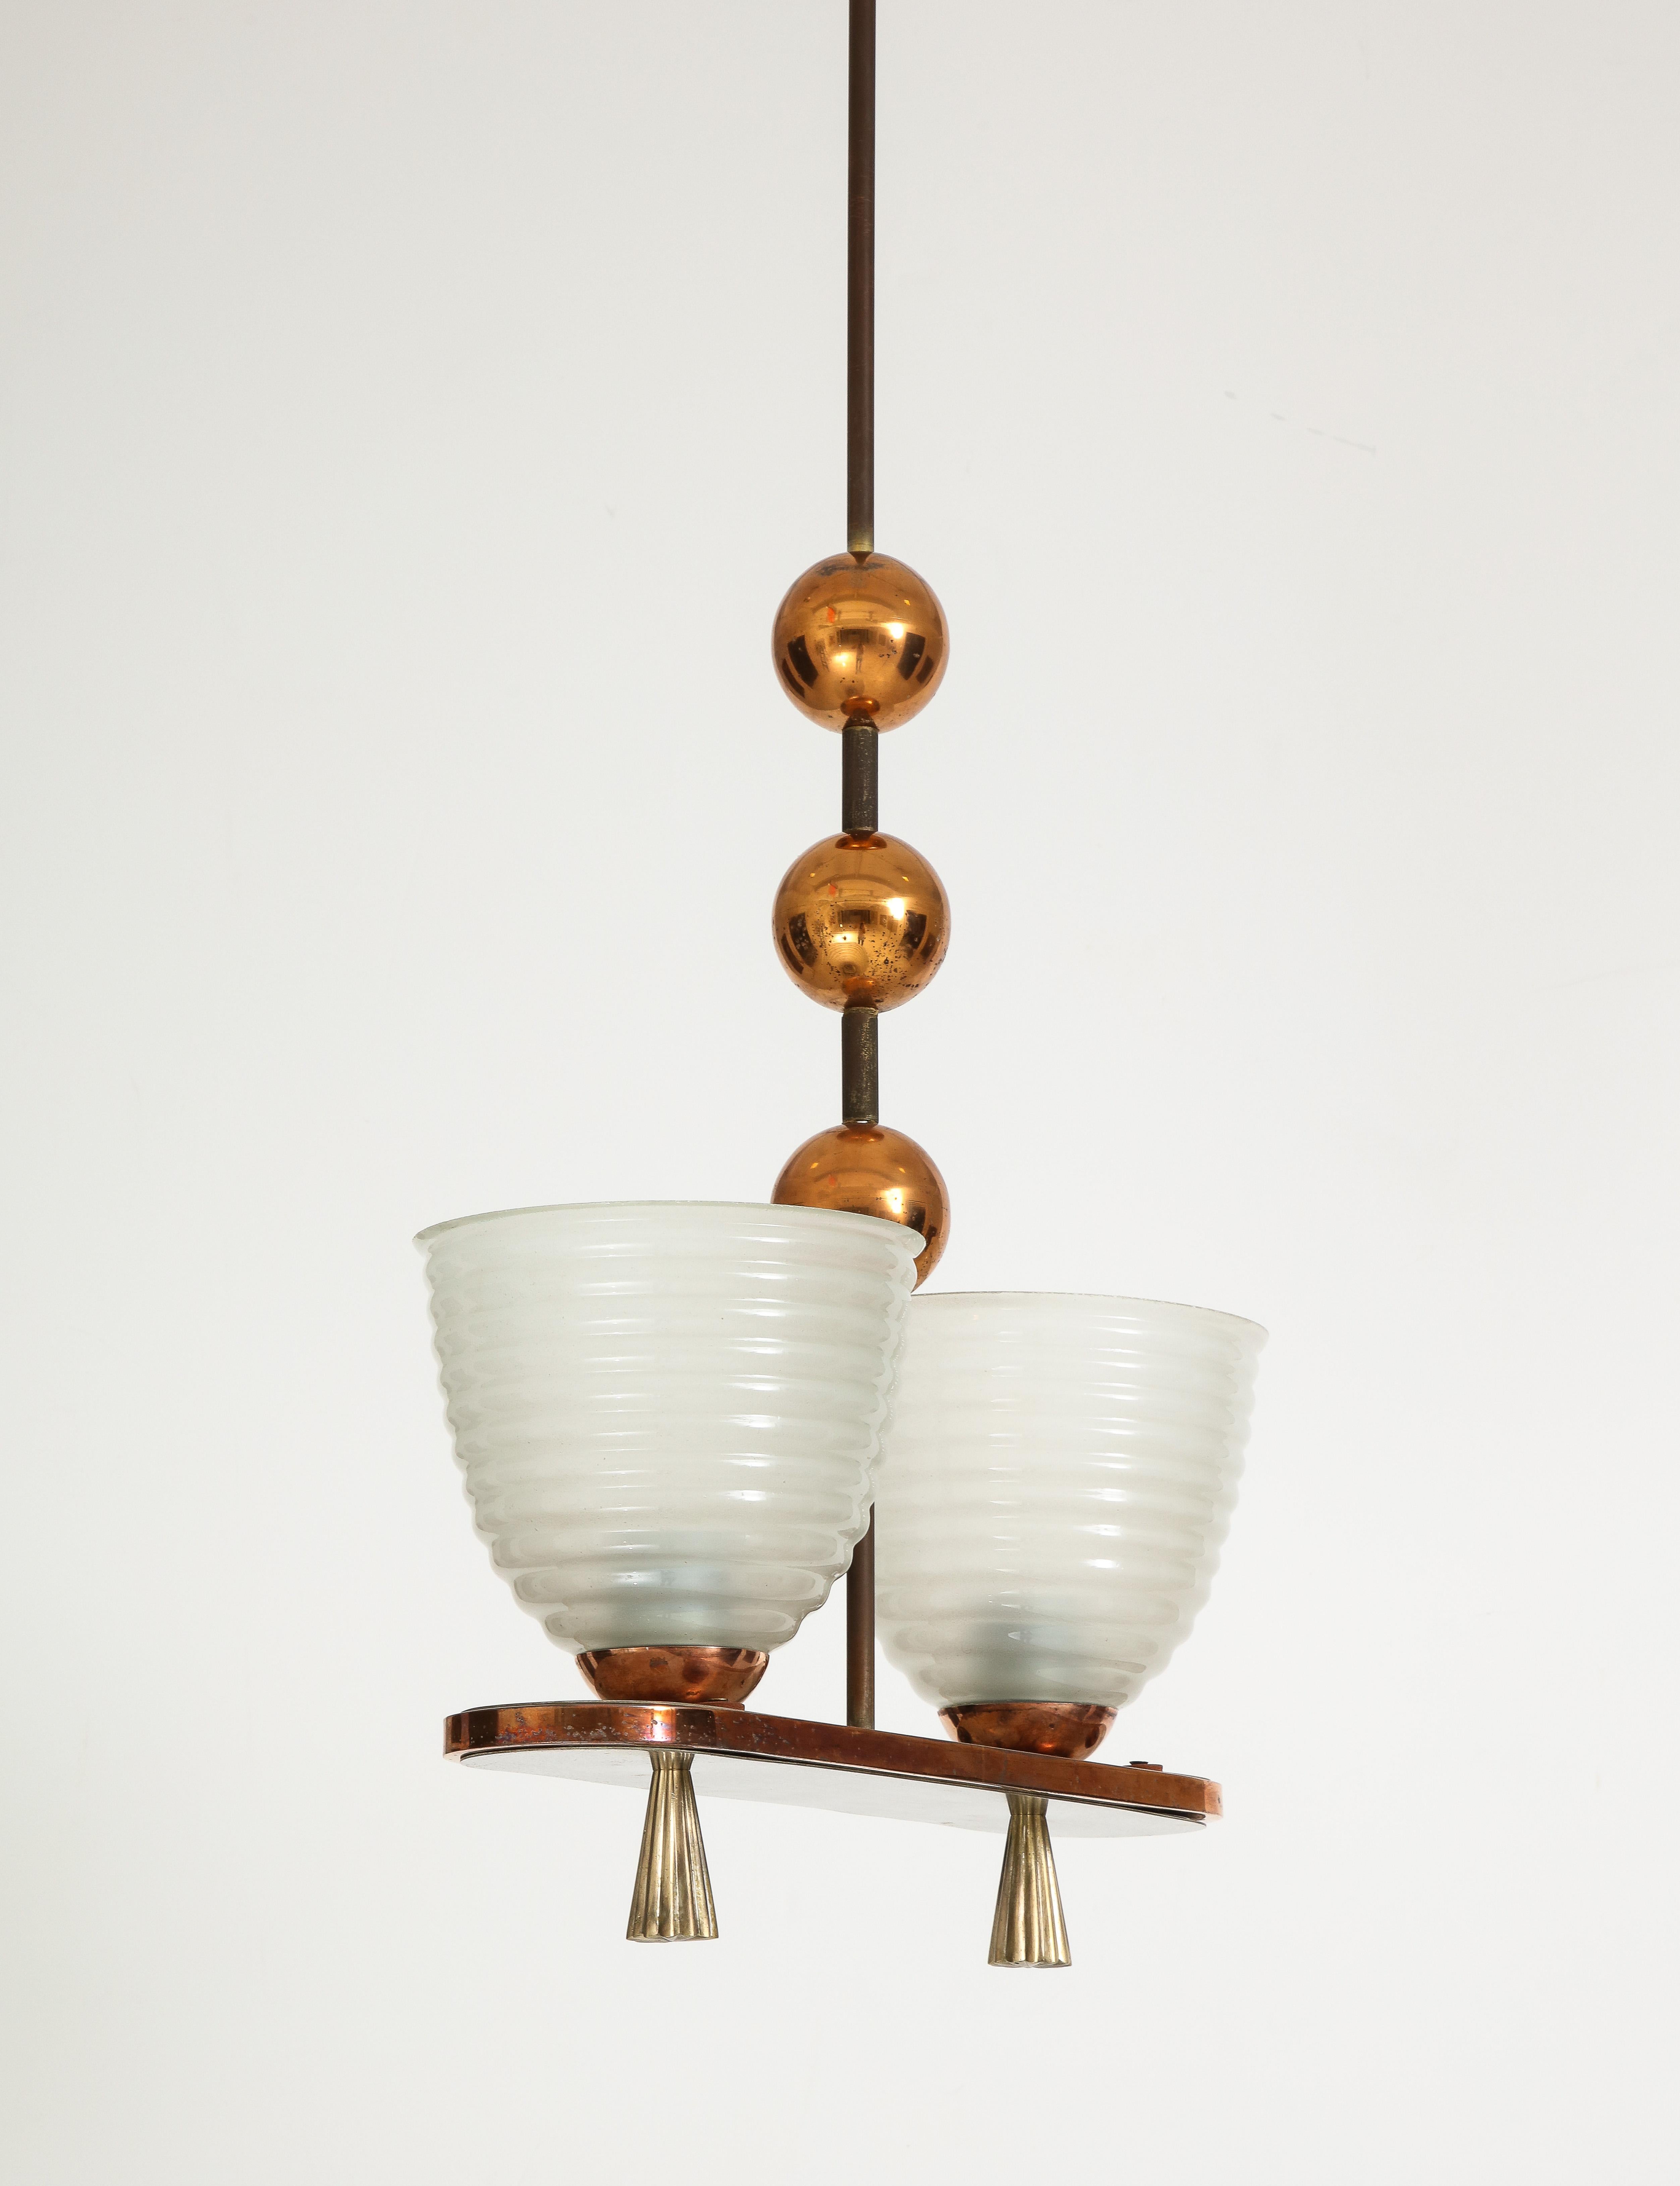 1940's Italian Copper And Brass Chandelier With Glass Shades For Sale 7